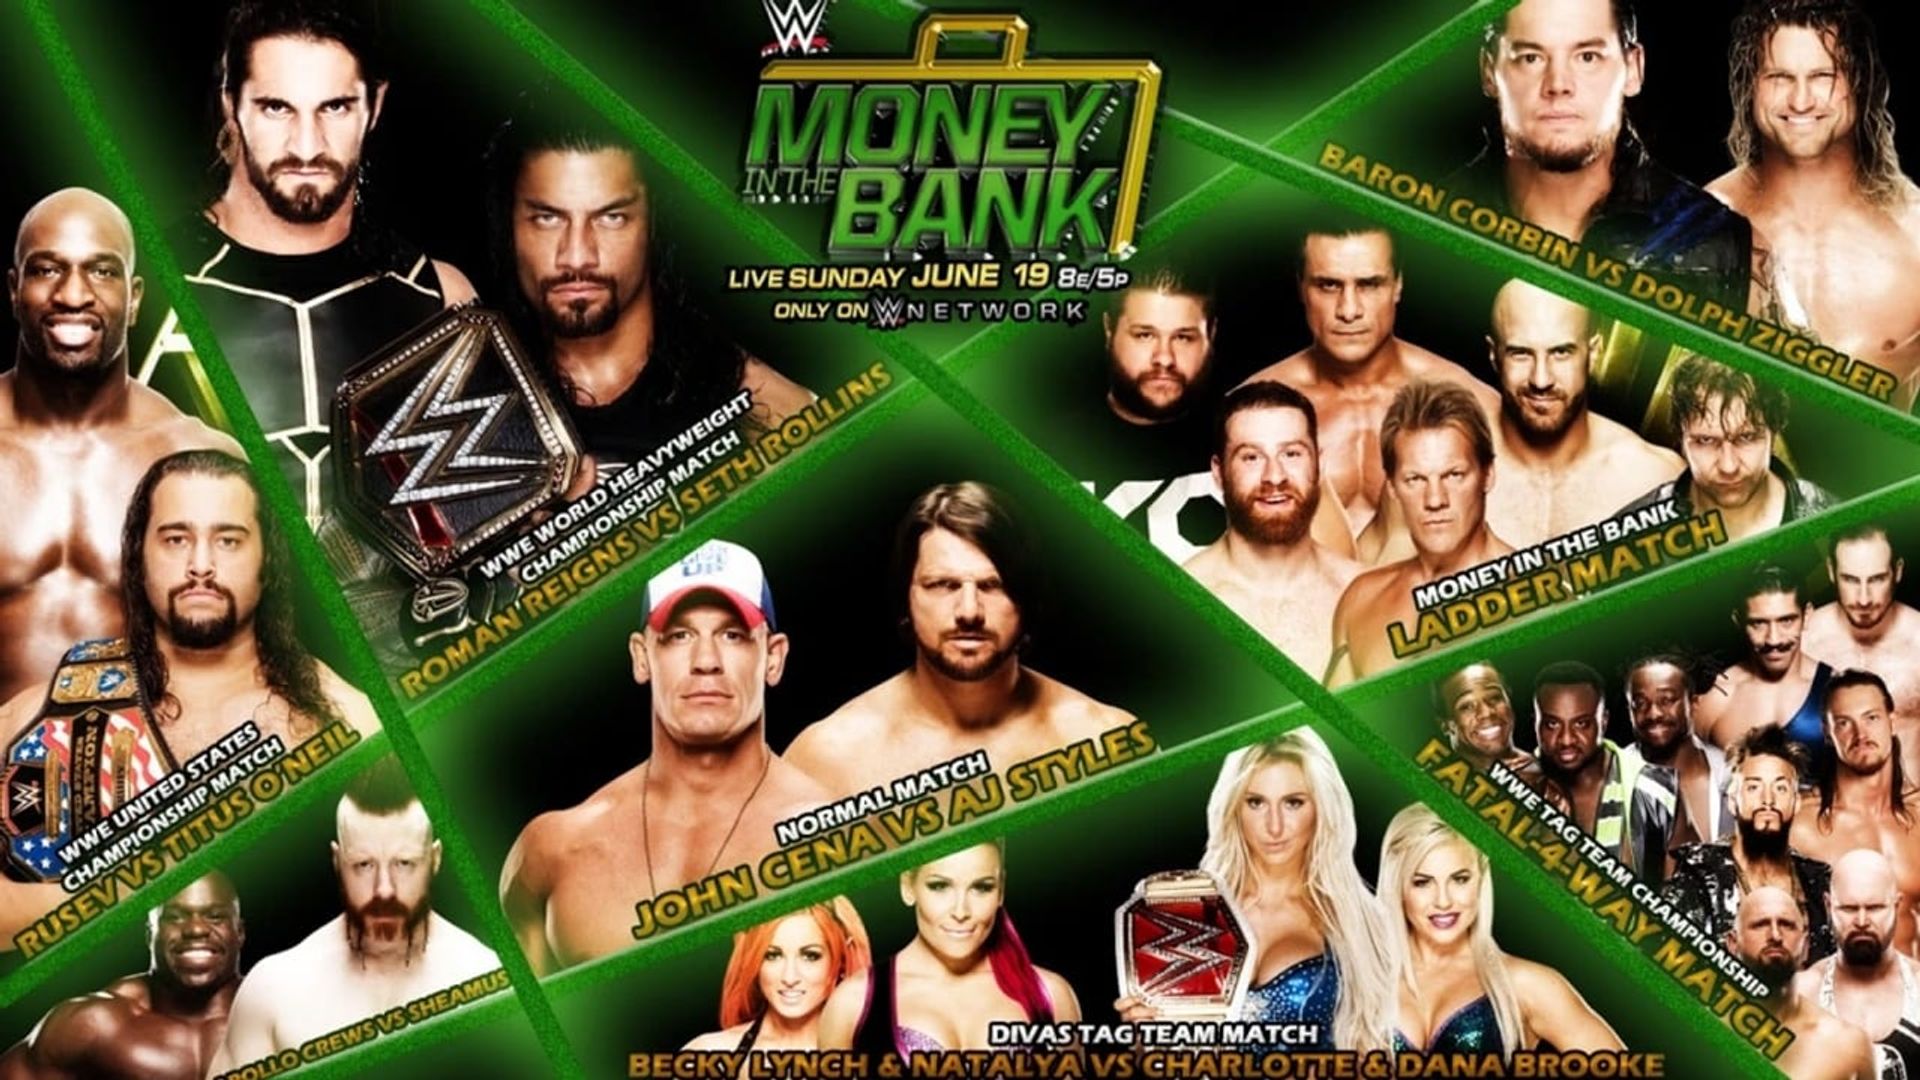 WWE Money in the Bank 2016 Backdrop